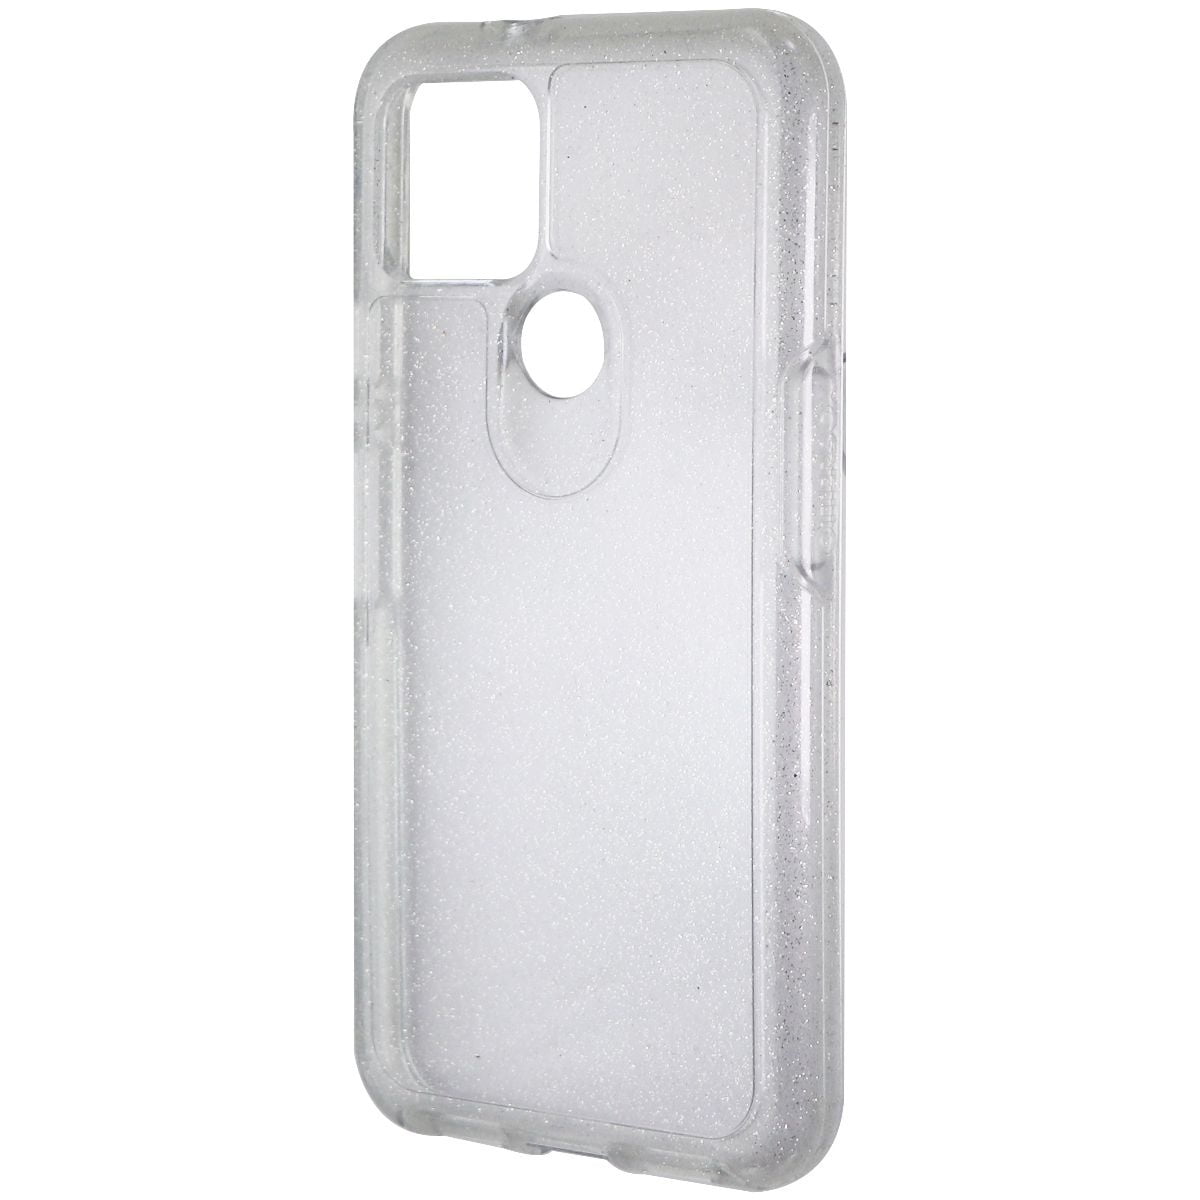 OtterBox Symmetry Series Case for Google Pixel 4 Smartphone Stardust/Clear 